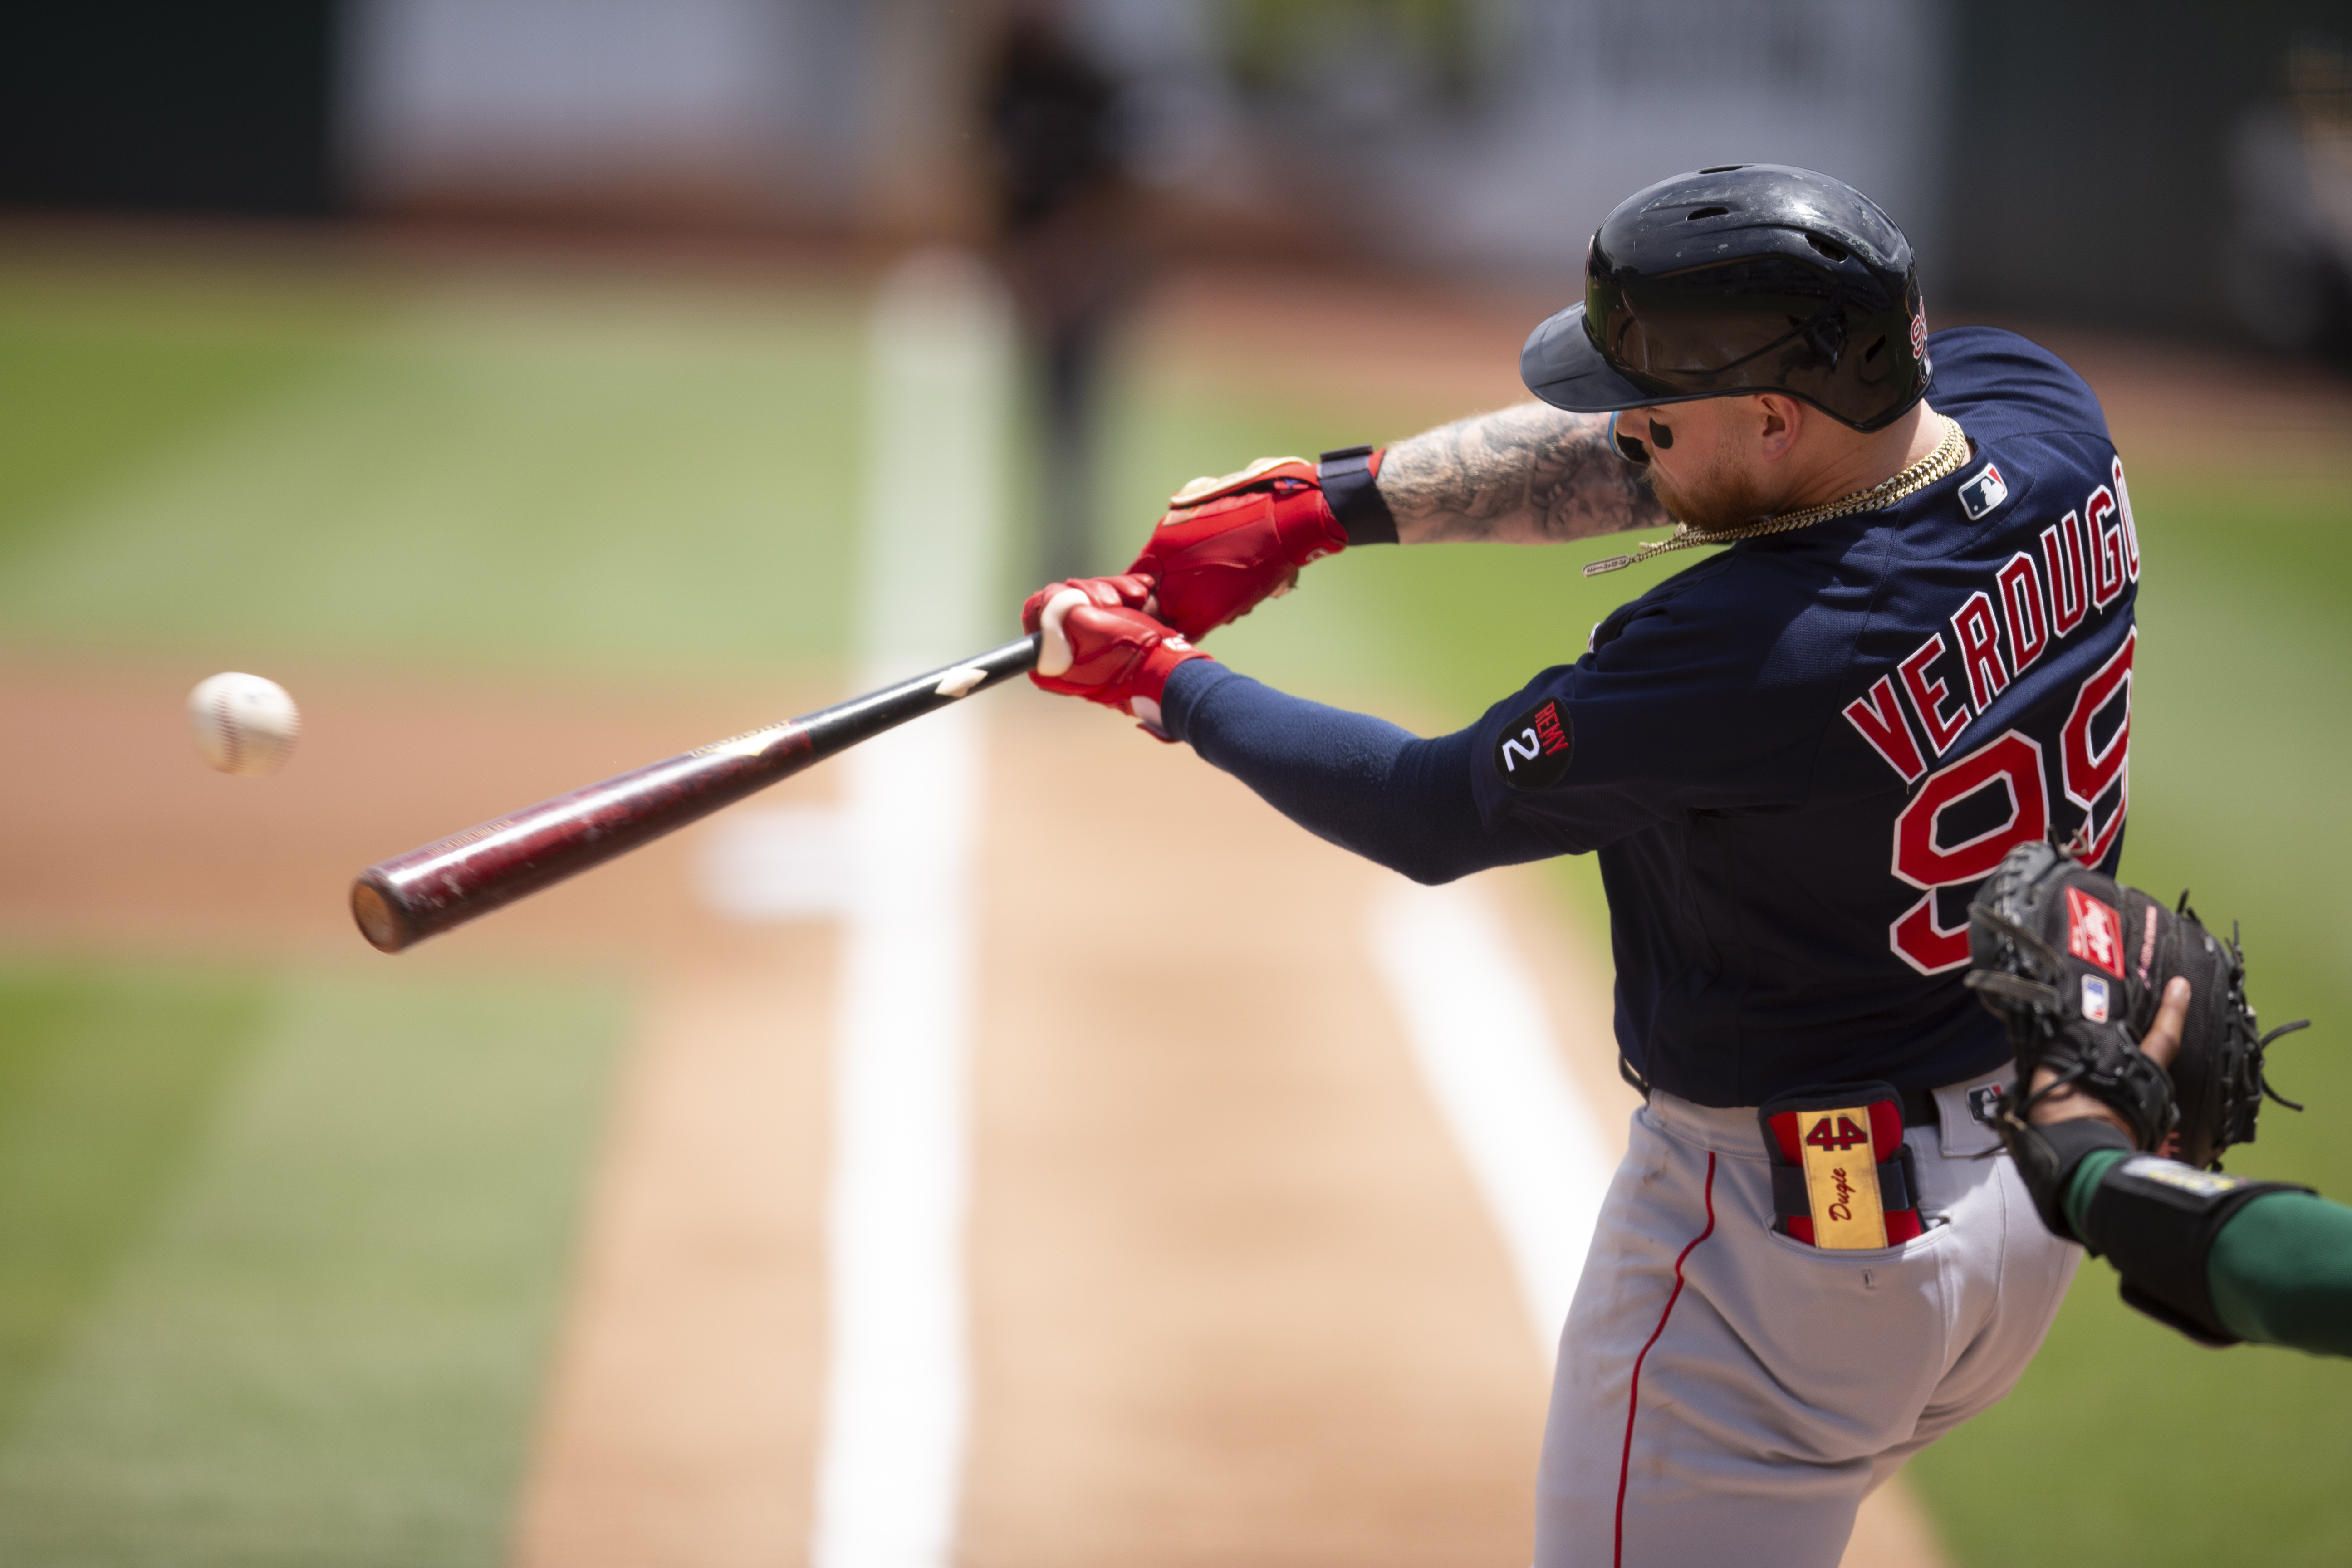 Red Sox outfielder Alex Verdugo is hitting well again, but his